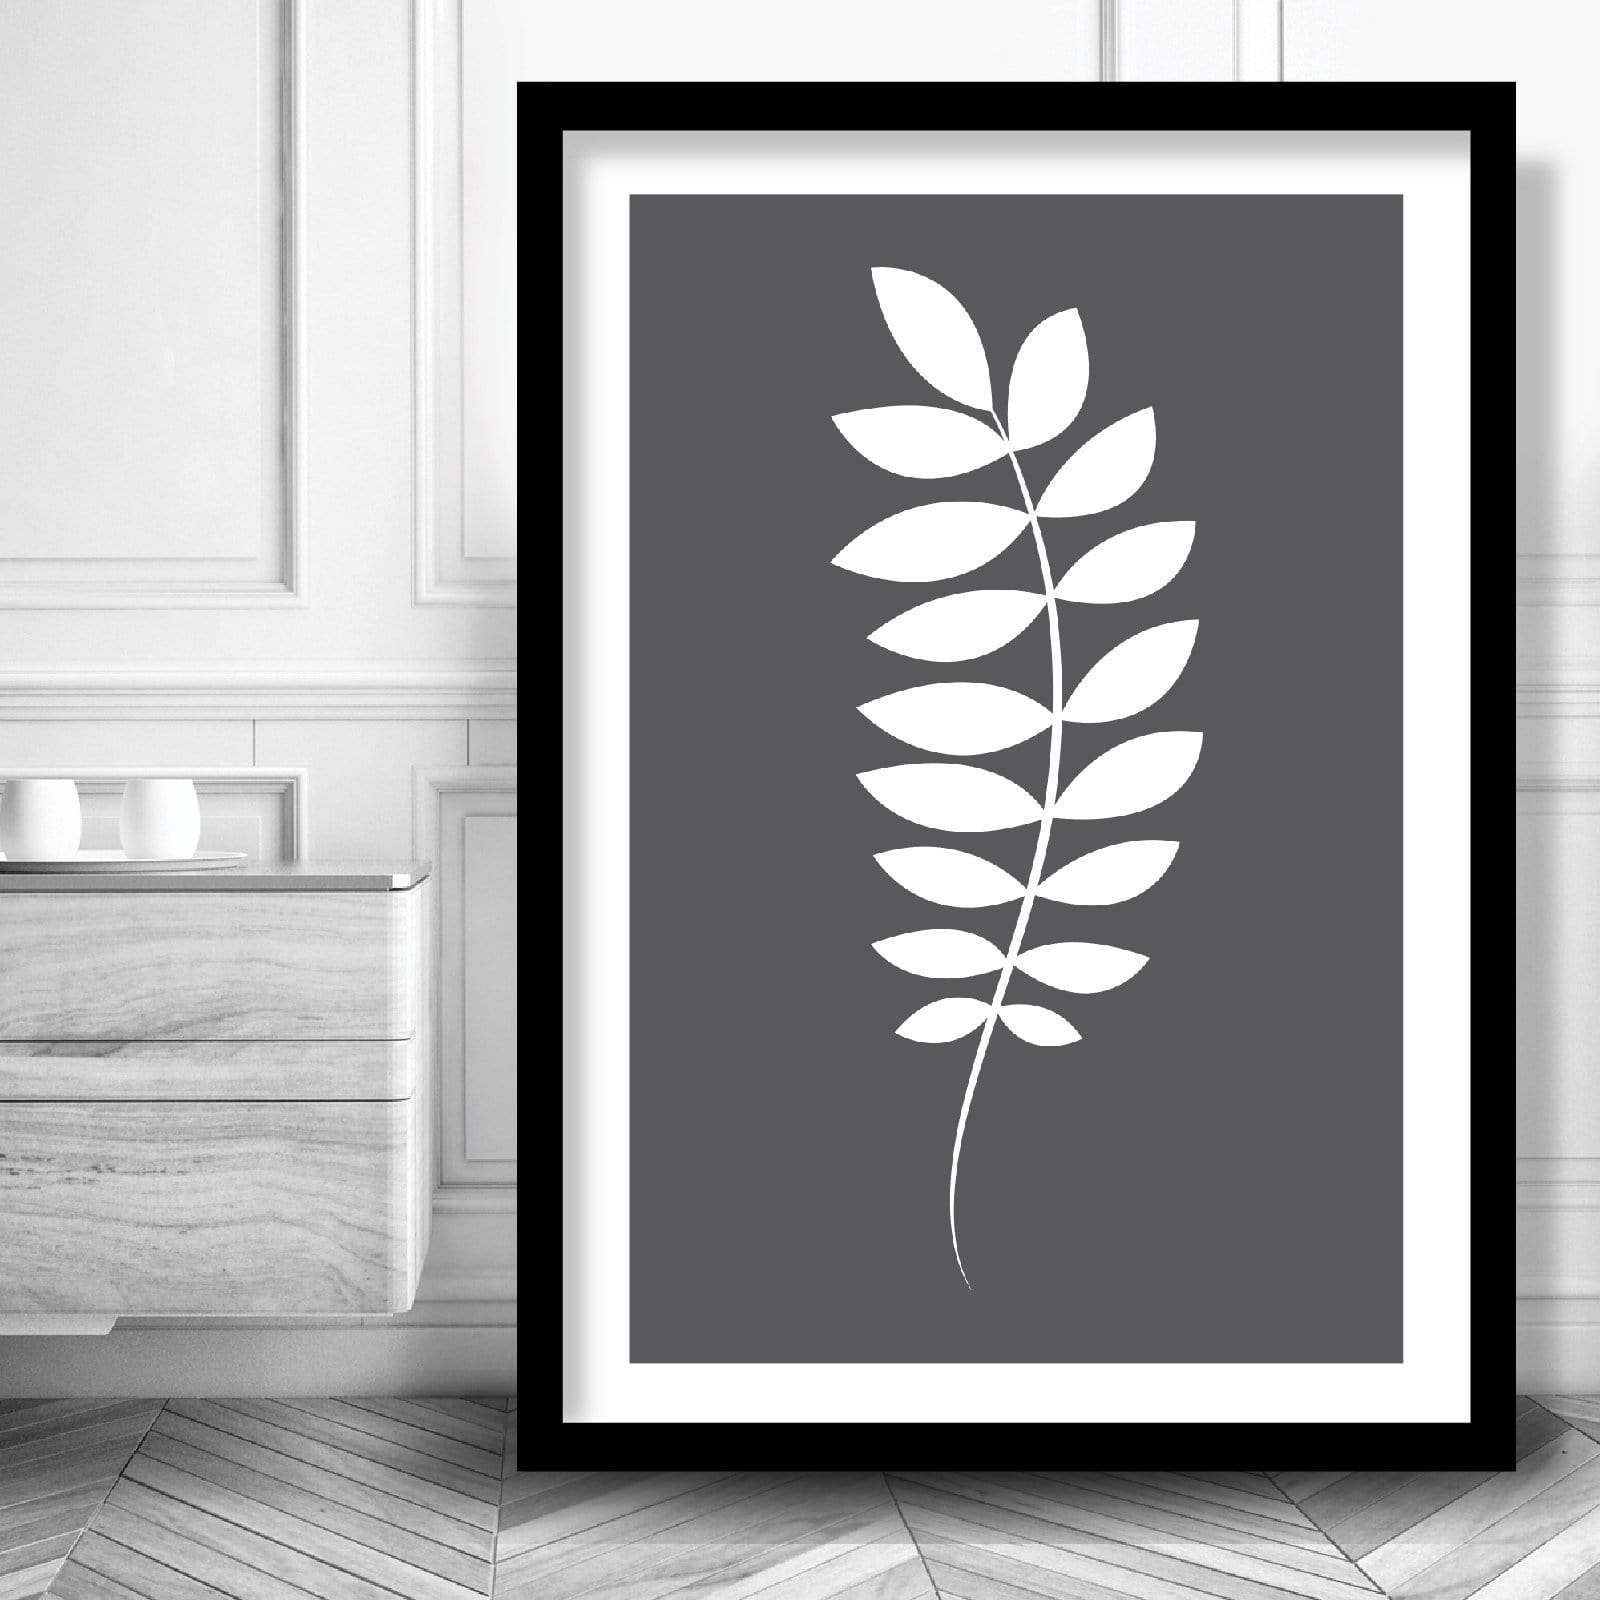 Set of 3 Yellow Grey and White Art Prints Tropical LEAVES